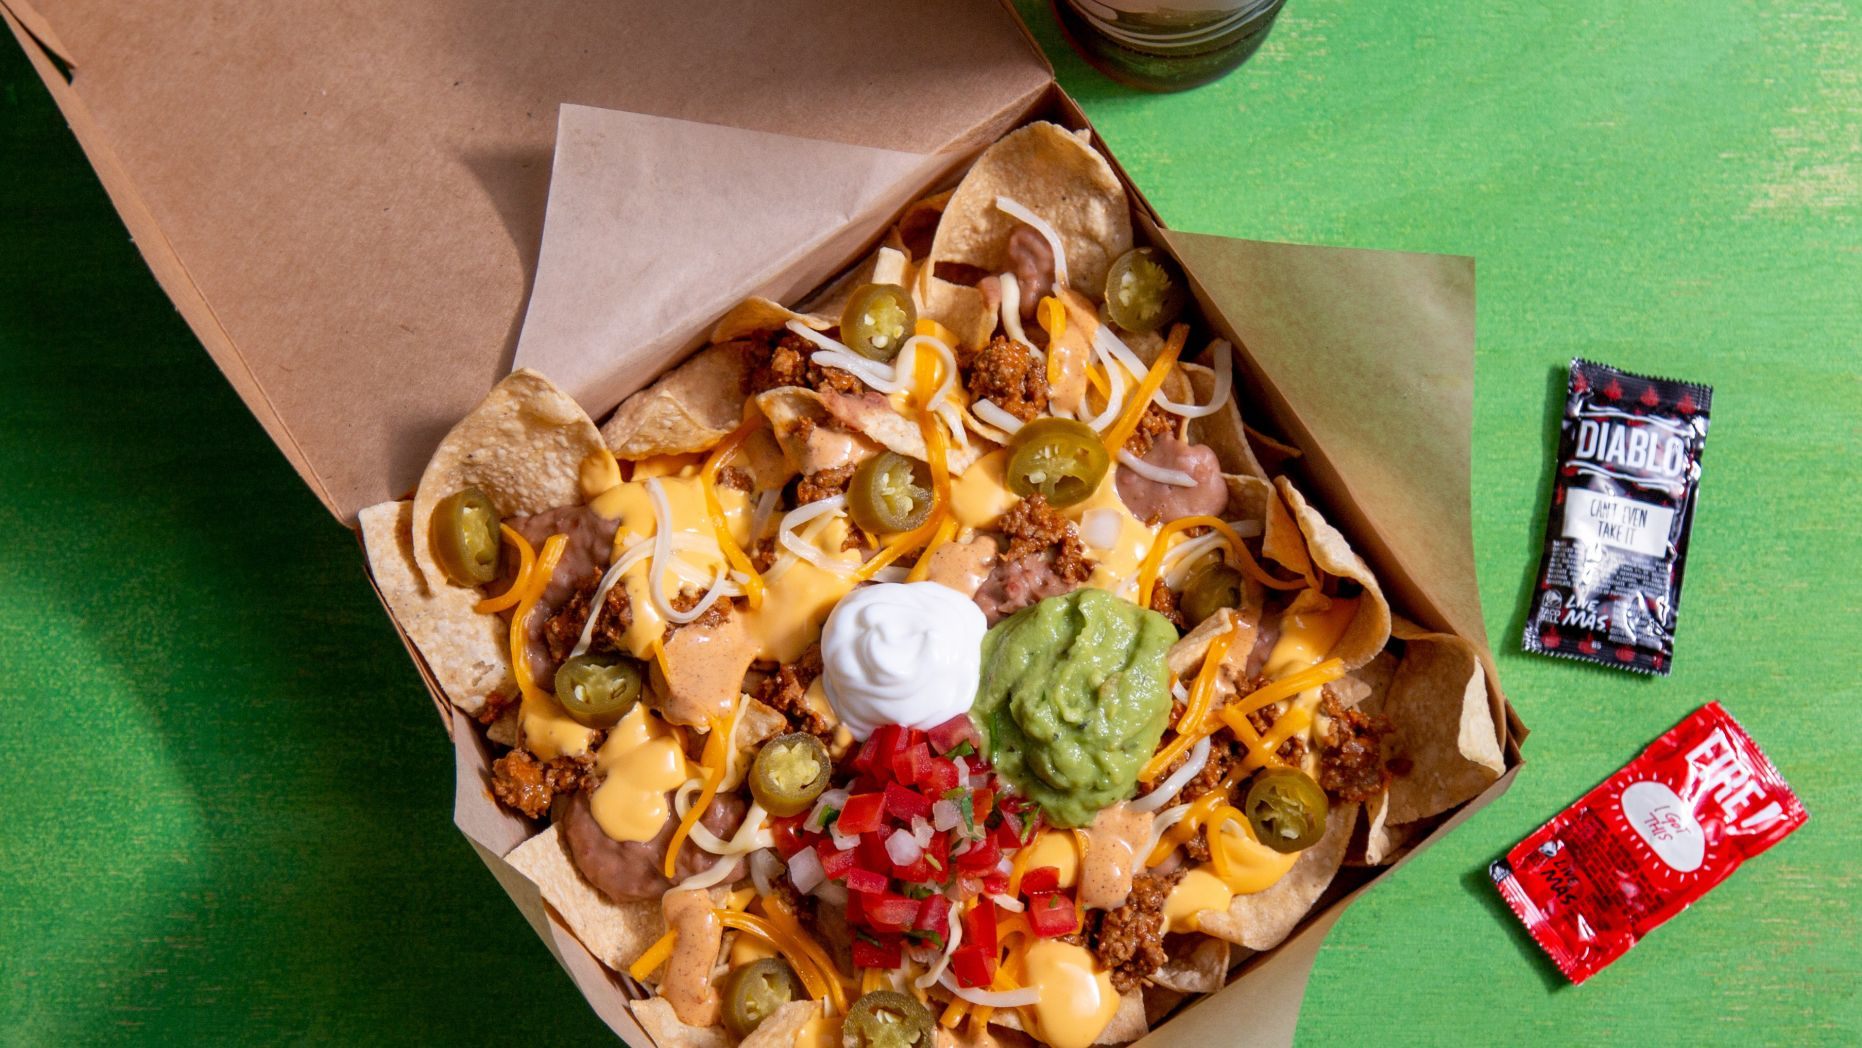 New Taco Bell Test Menu Items For 2019 Include Delicious Nachos Boxes